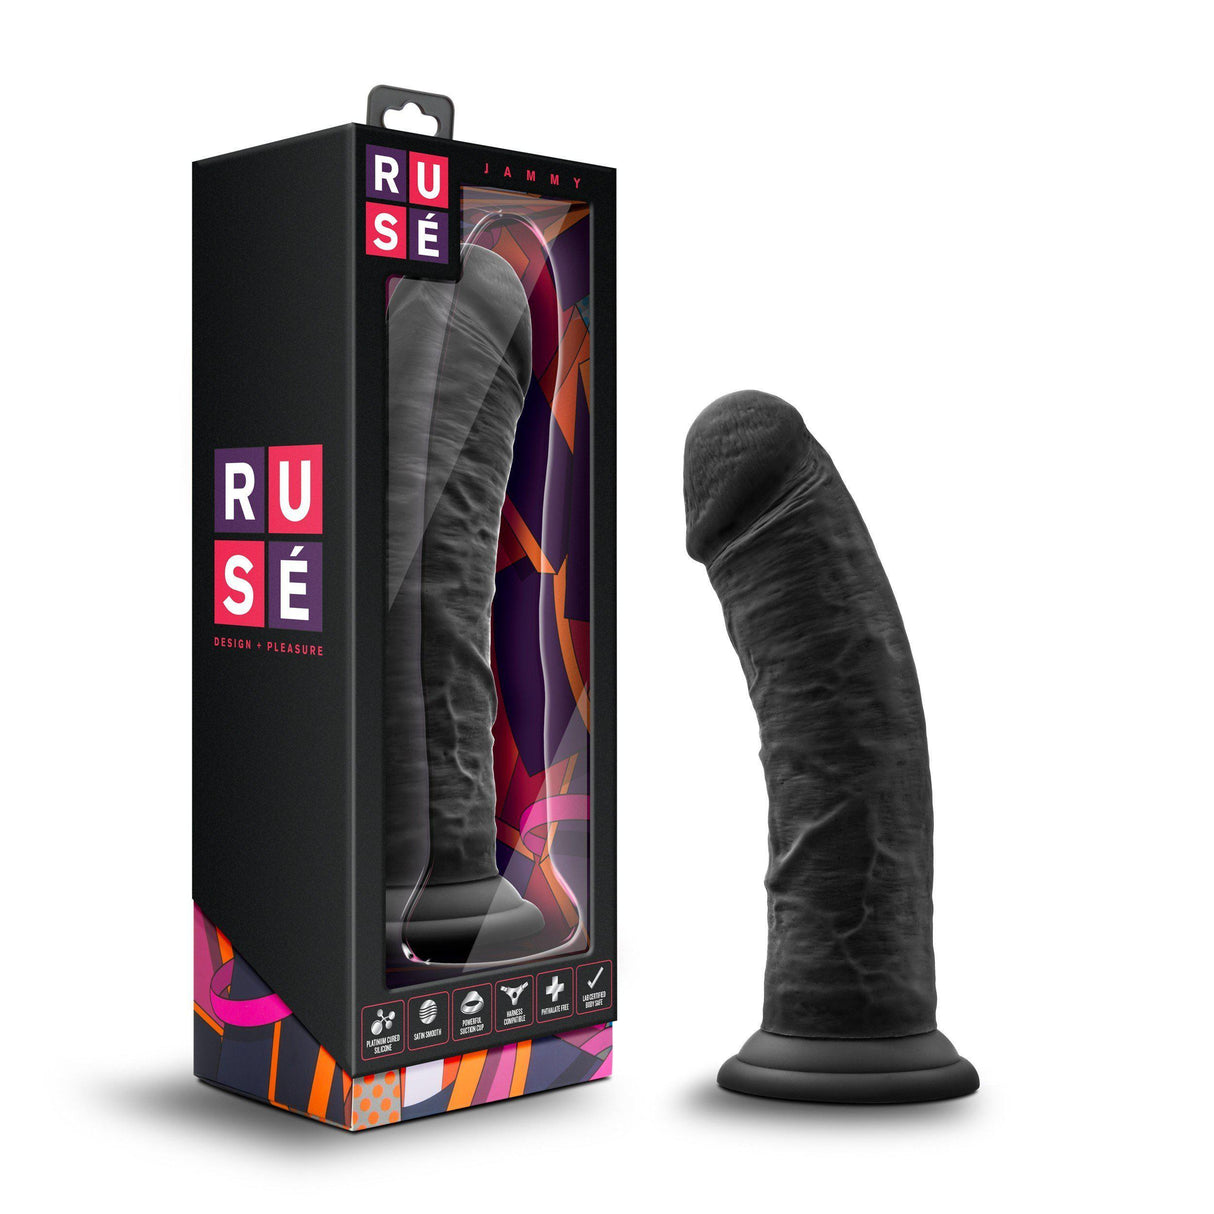 Ruse Jammy 8 Inch Strap On Compatible Dildo